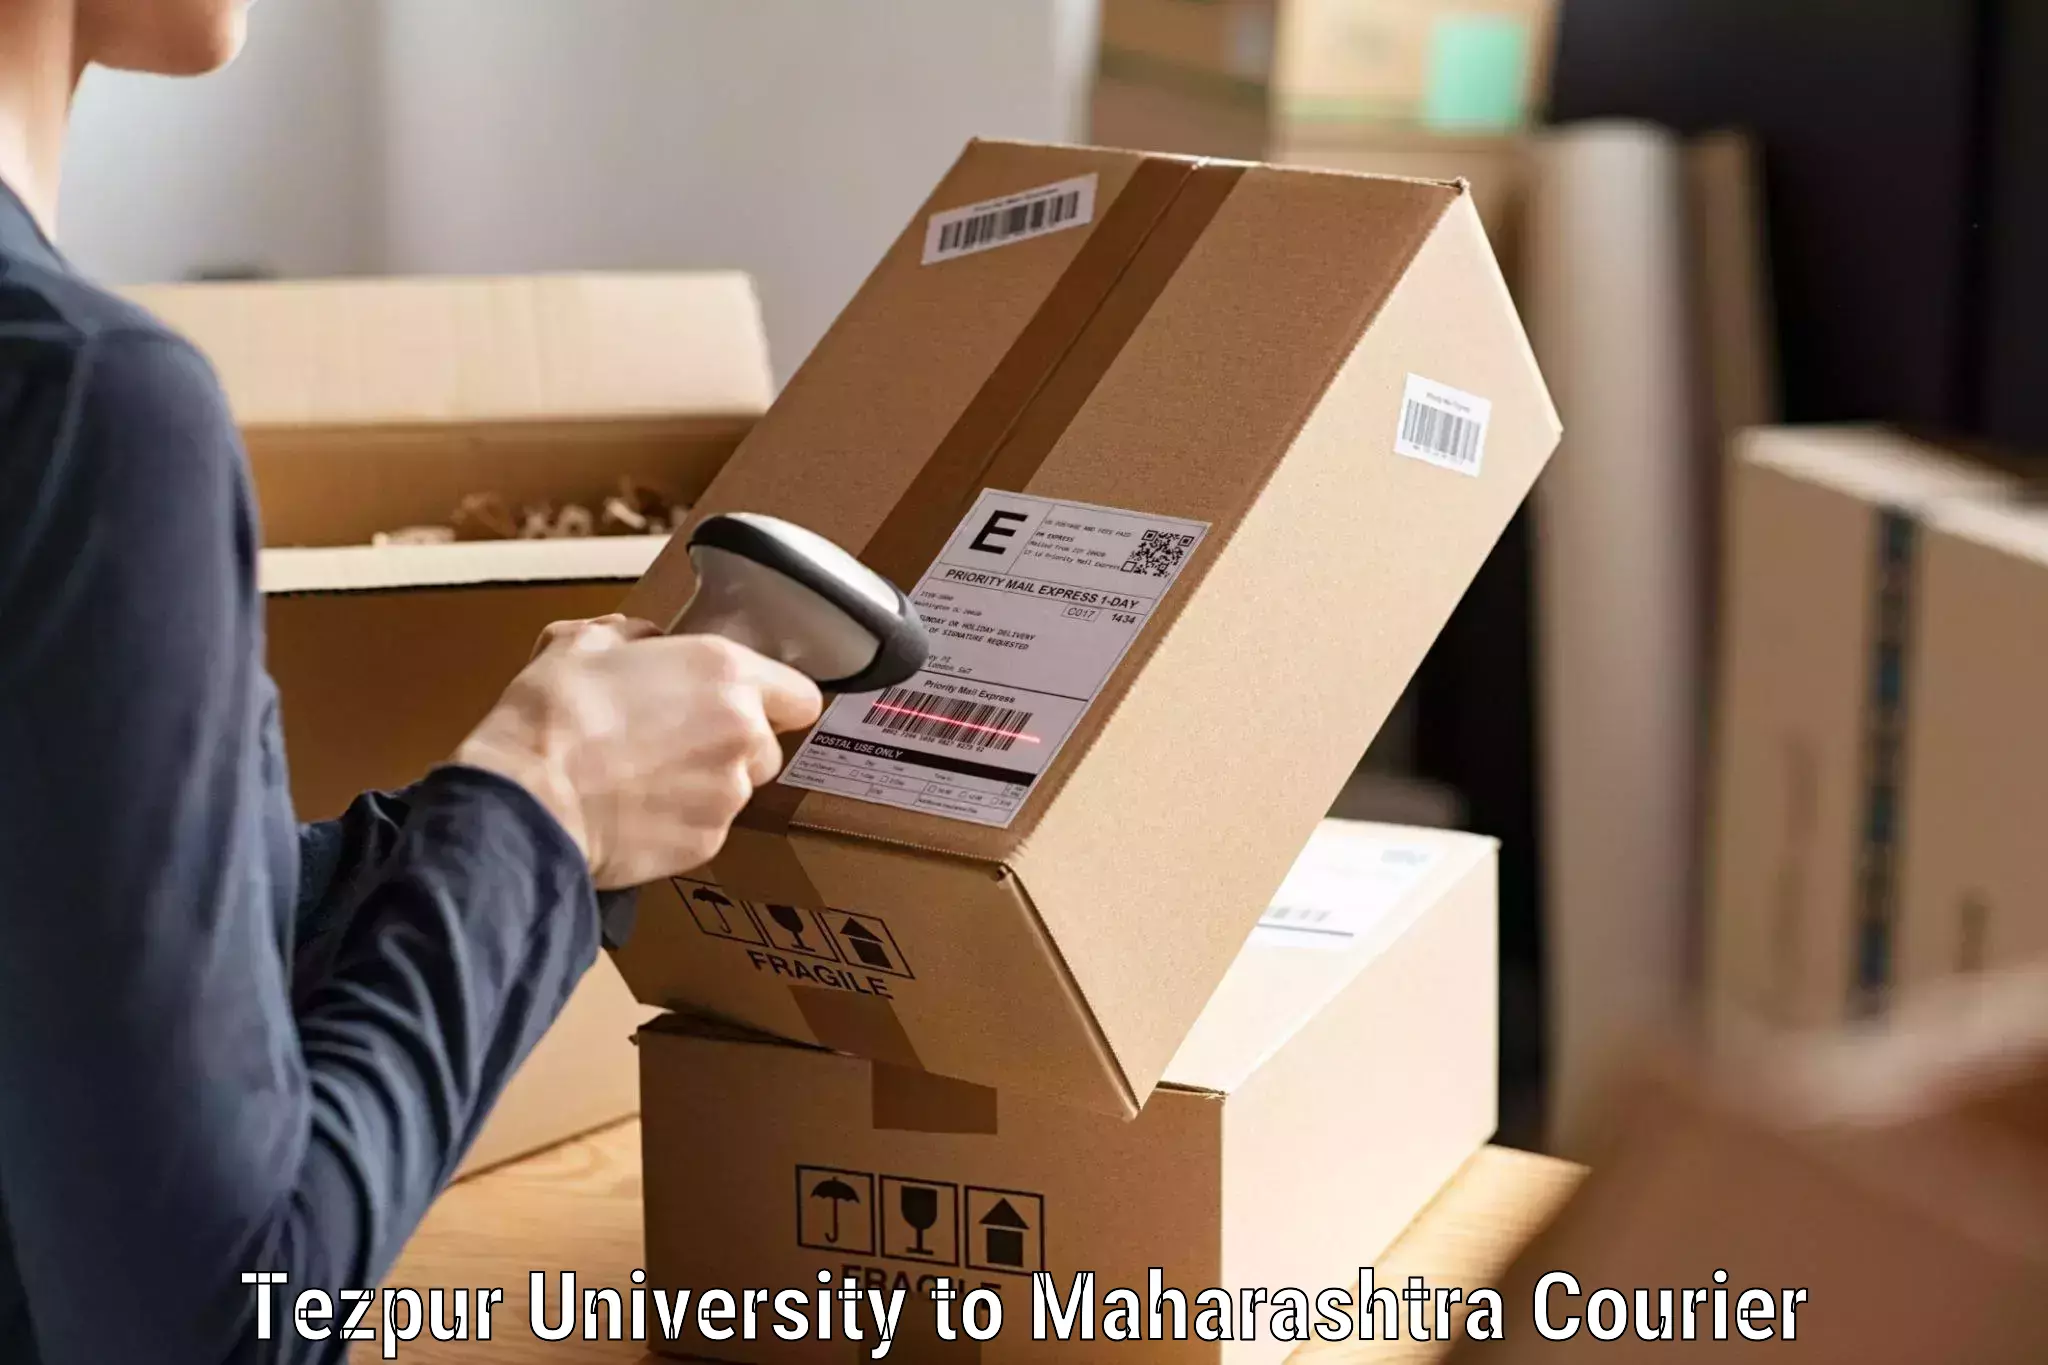 Express package delivery Tezpur University to Ahmednagar